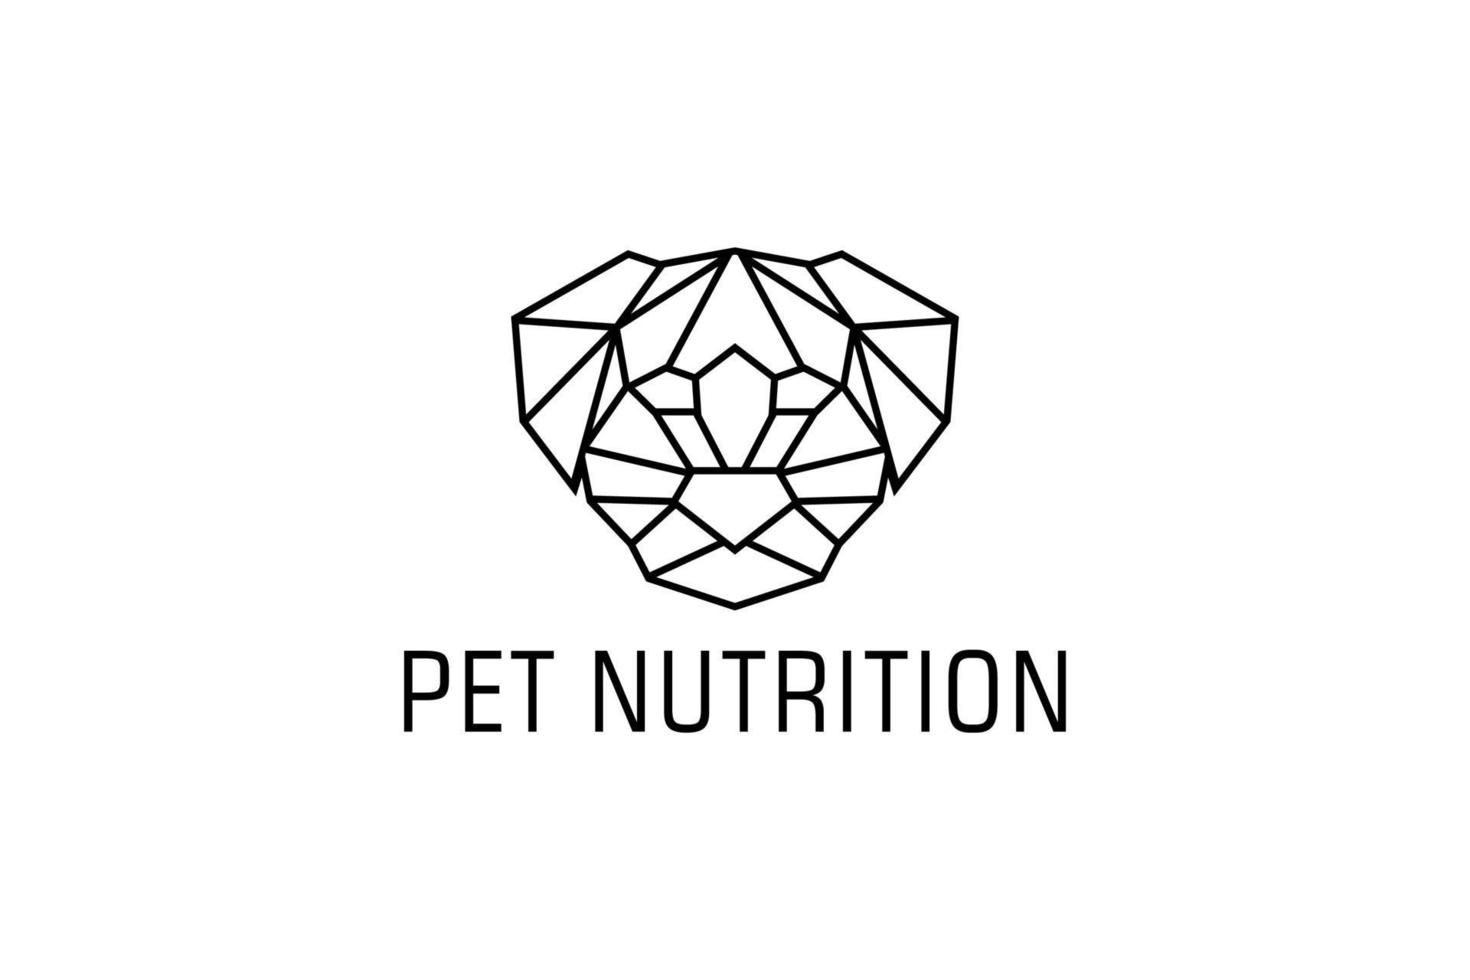 Pet Nutrition Logo. Black Geometric Style isolated Line on White Background. Usable for Business, Animal, Pet and Branding Logos. Flat Vector Logo Design Template Element.